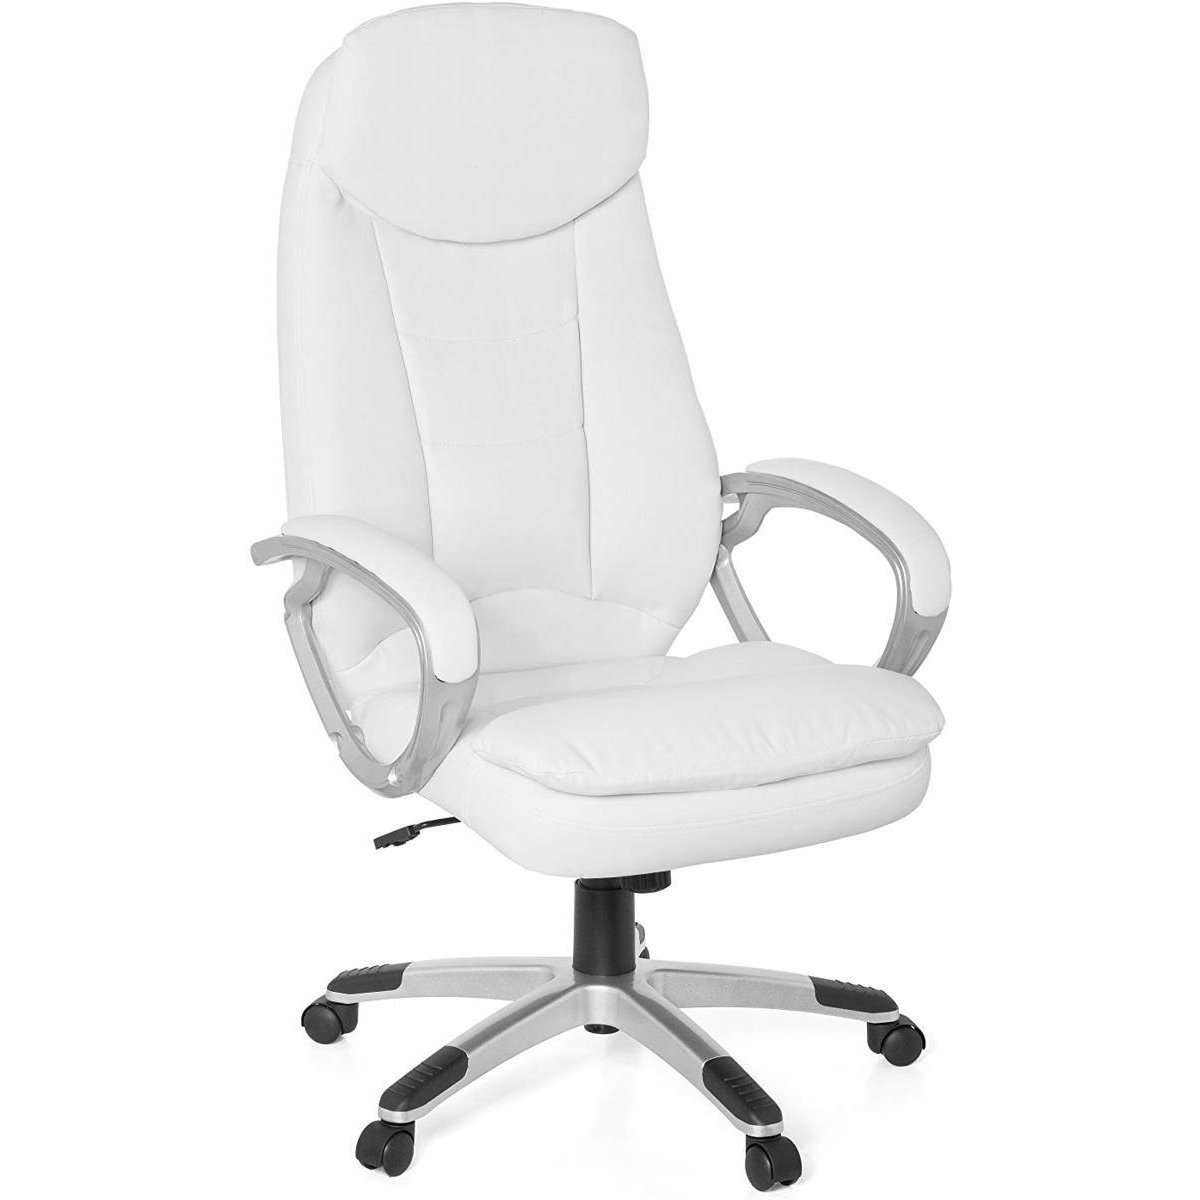 Nancy's Van Nest Office Chair - Executive Chair - Ergonomic Swivel Chair - Office Chairs For Adults